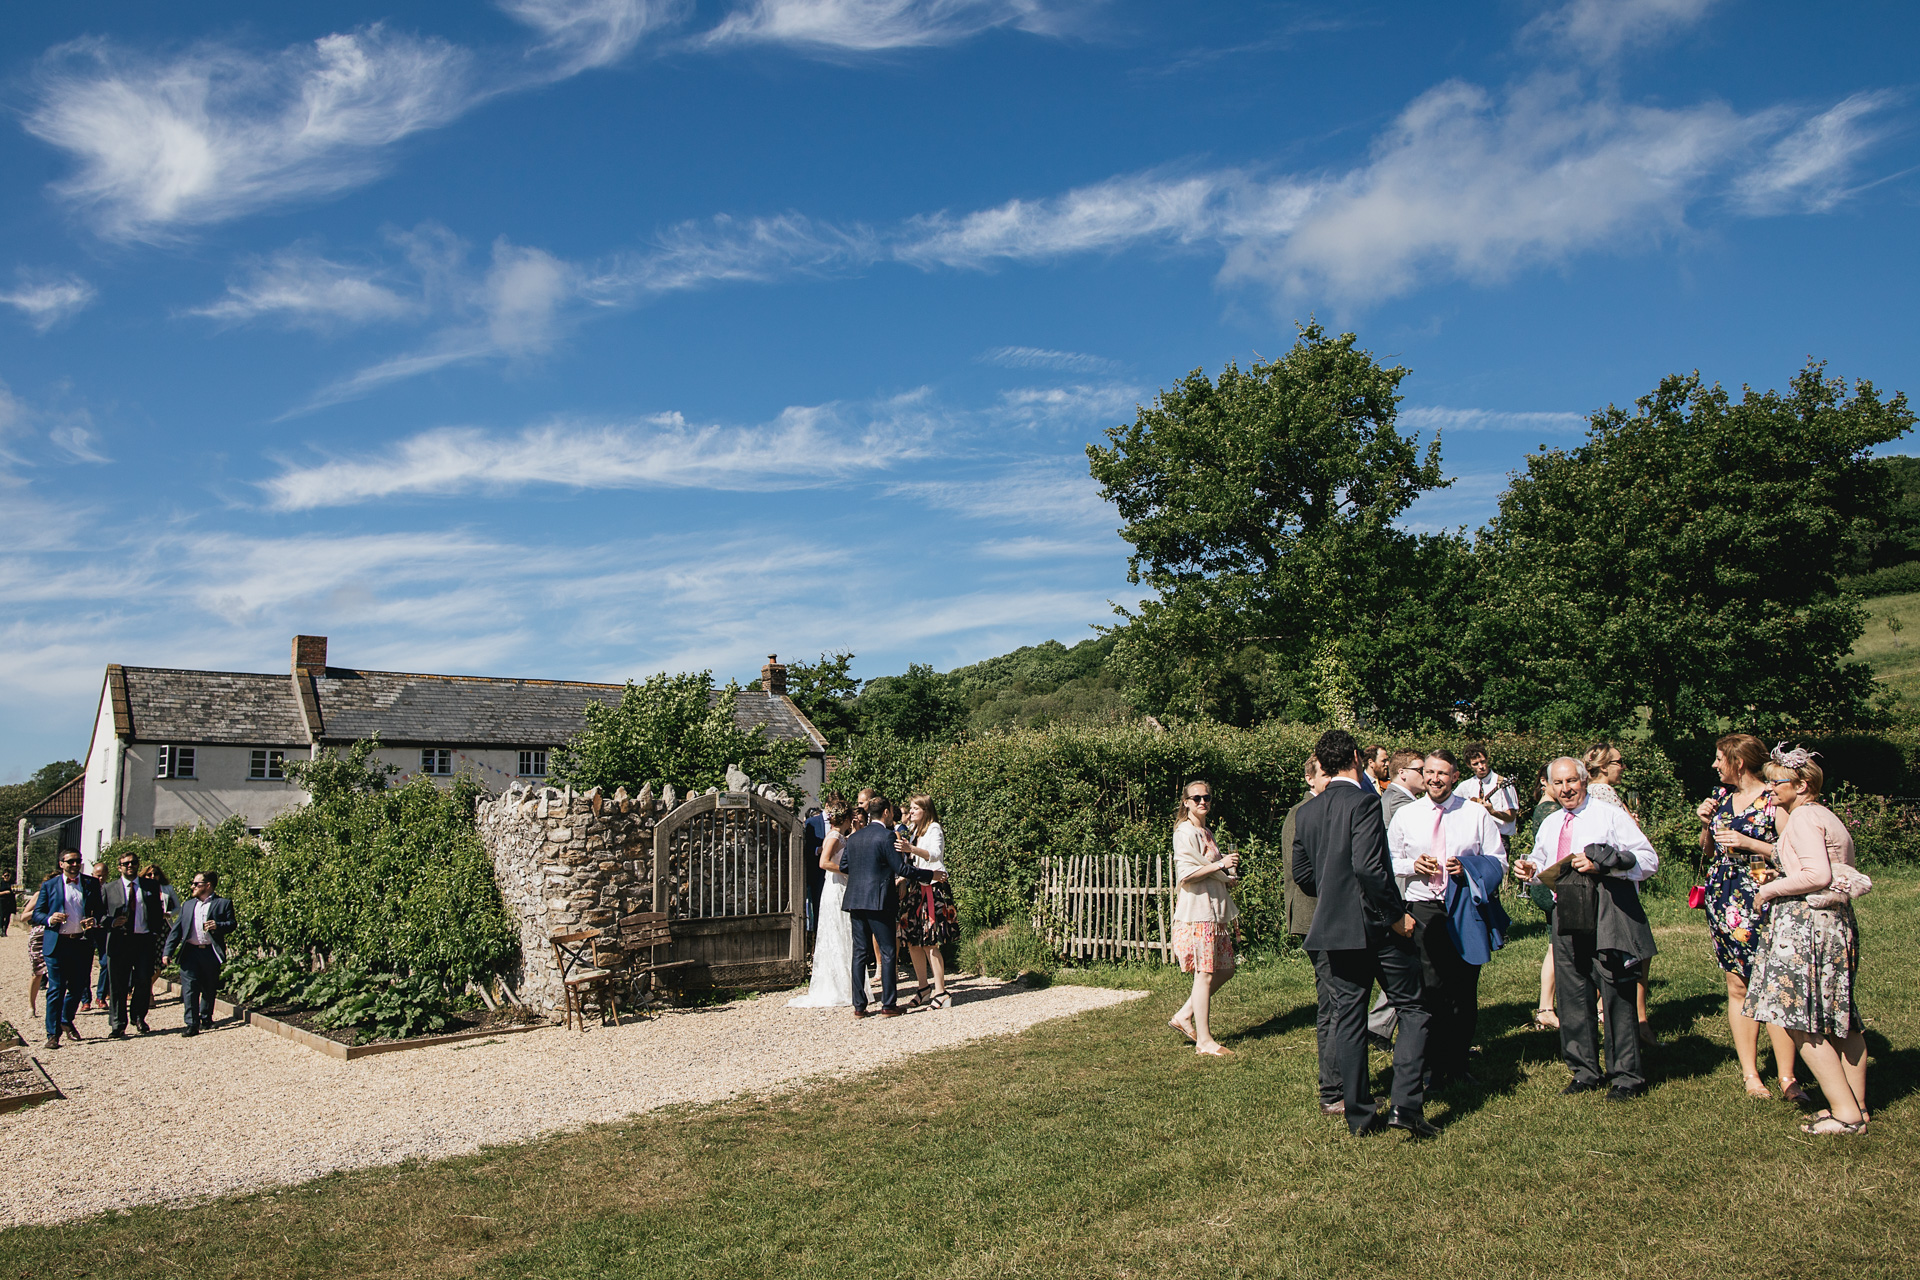 Wedding guests in field with River Cottage farmhouse behind